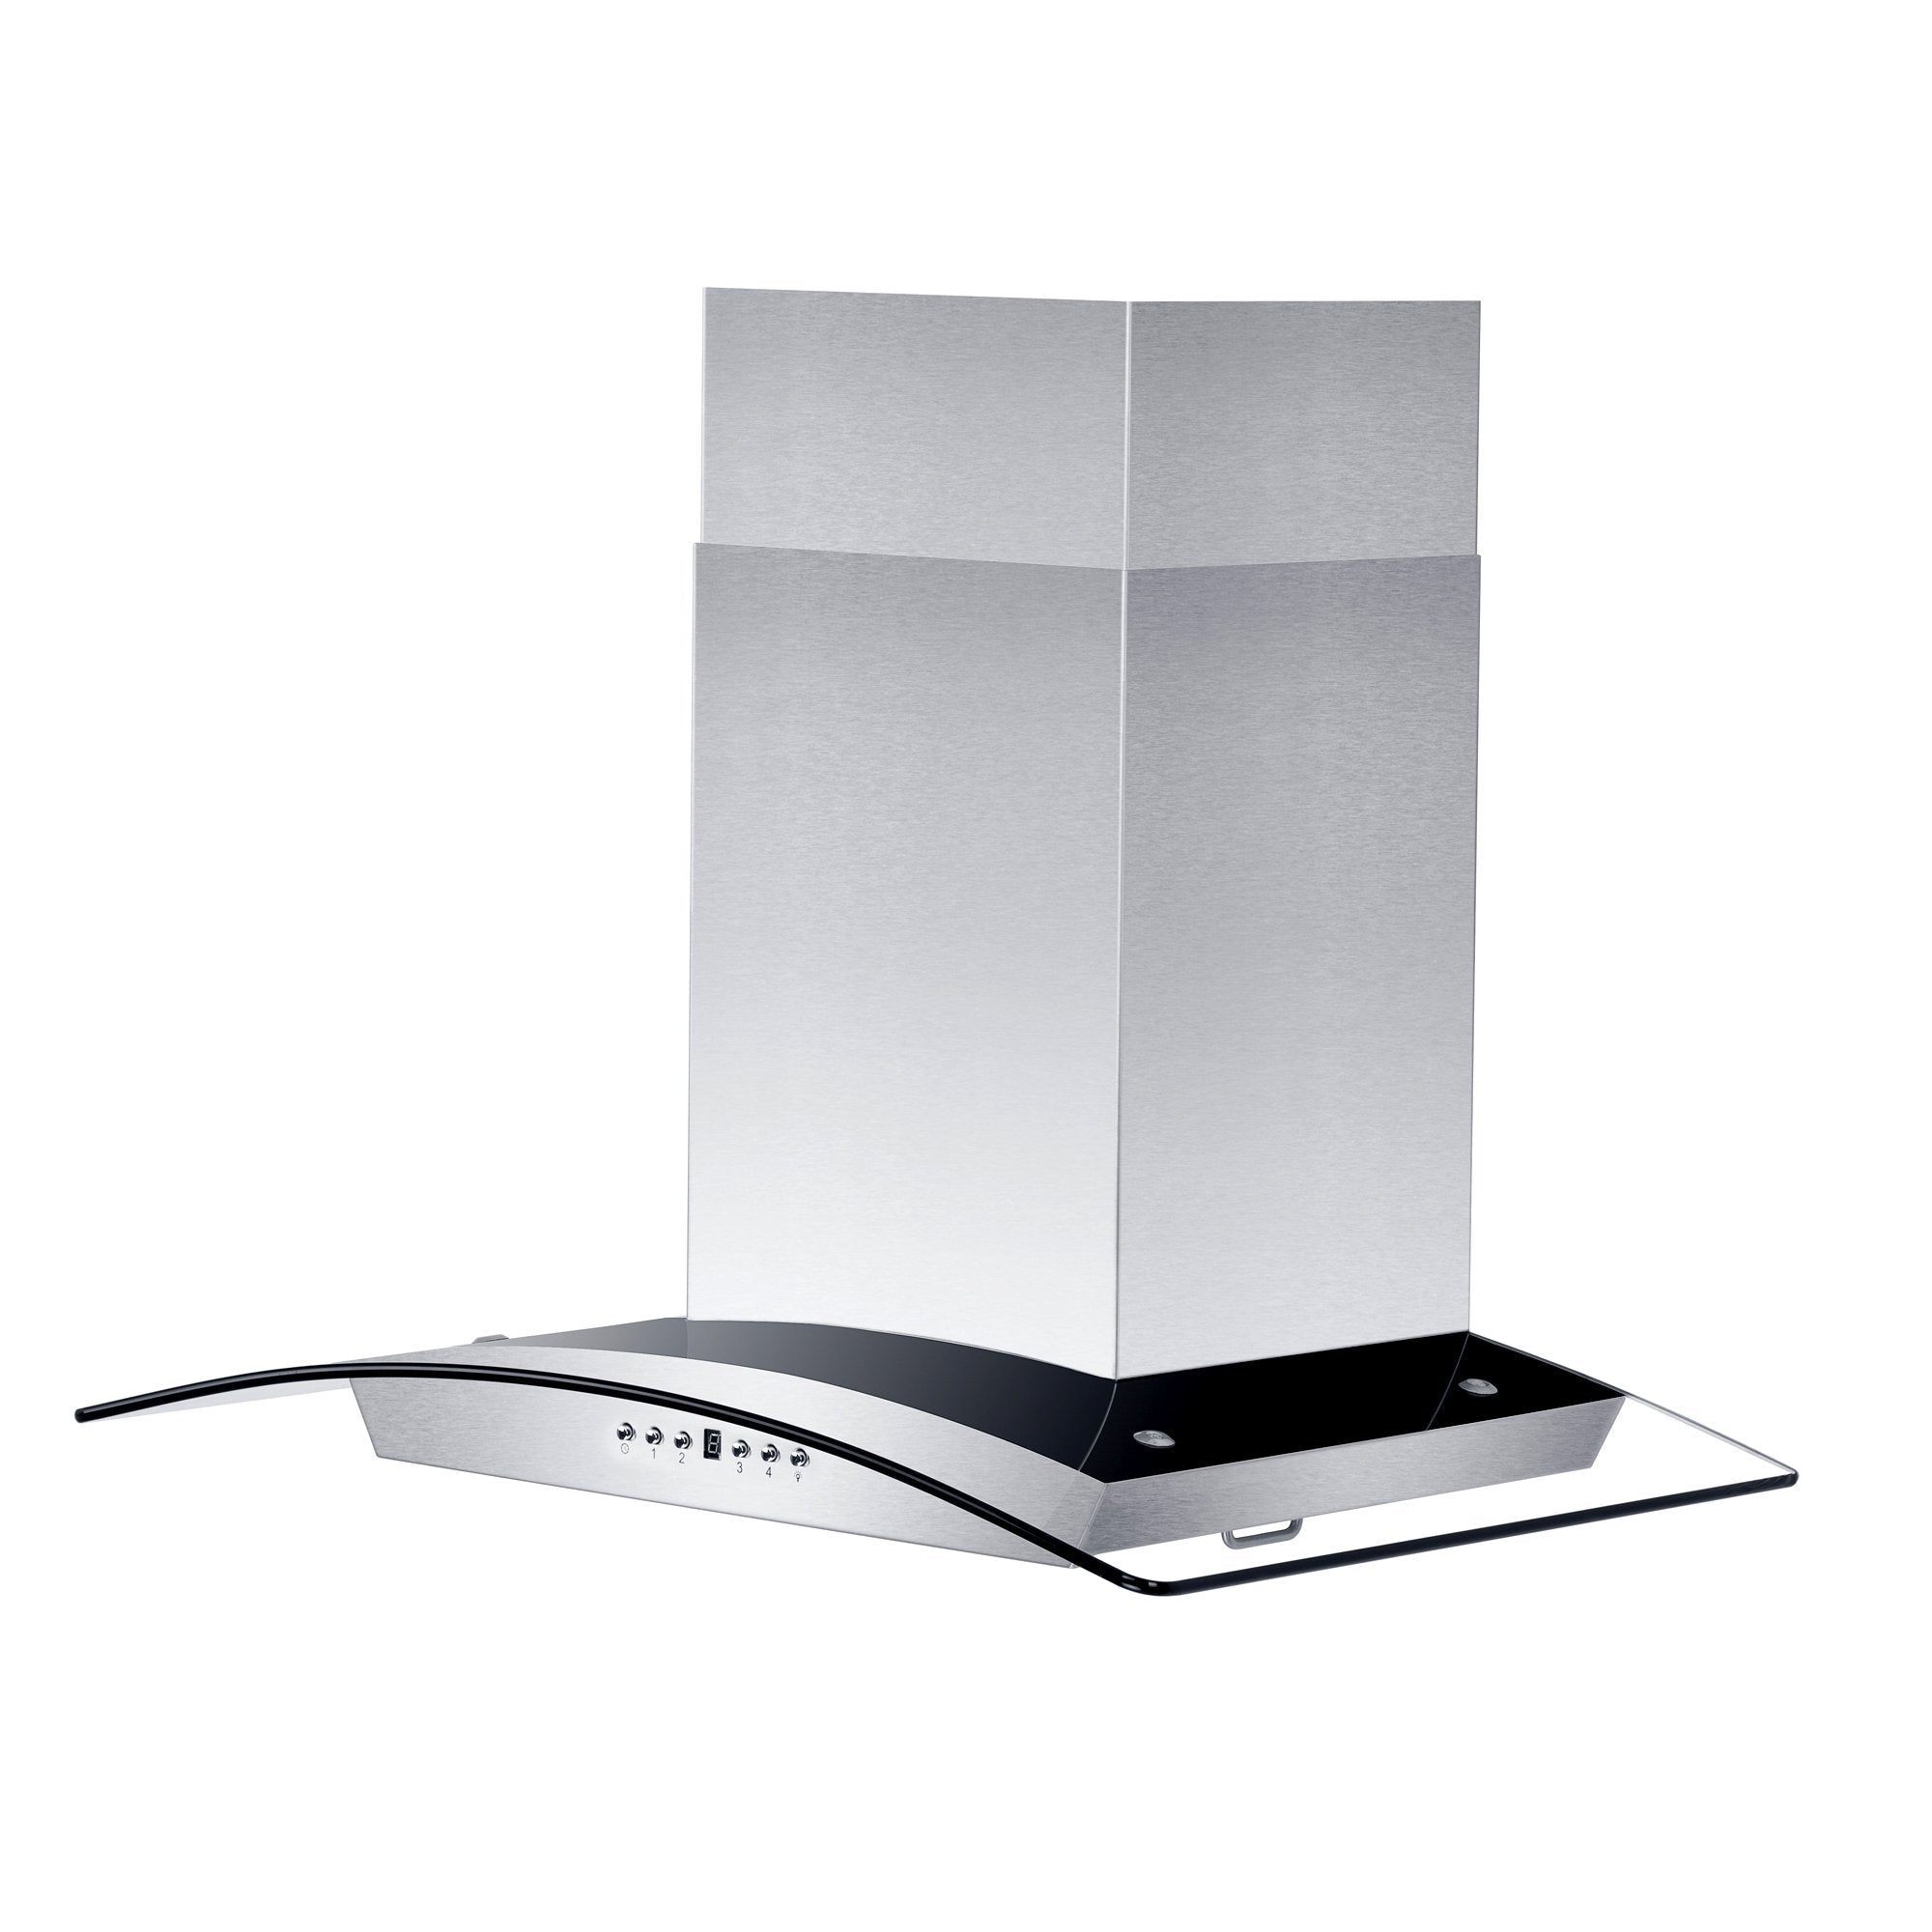 ZLINE Convertible Vent Wall Mount Range Hood in Stainless Steel & Glass with Crown Molding (KZCRN) side above.